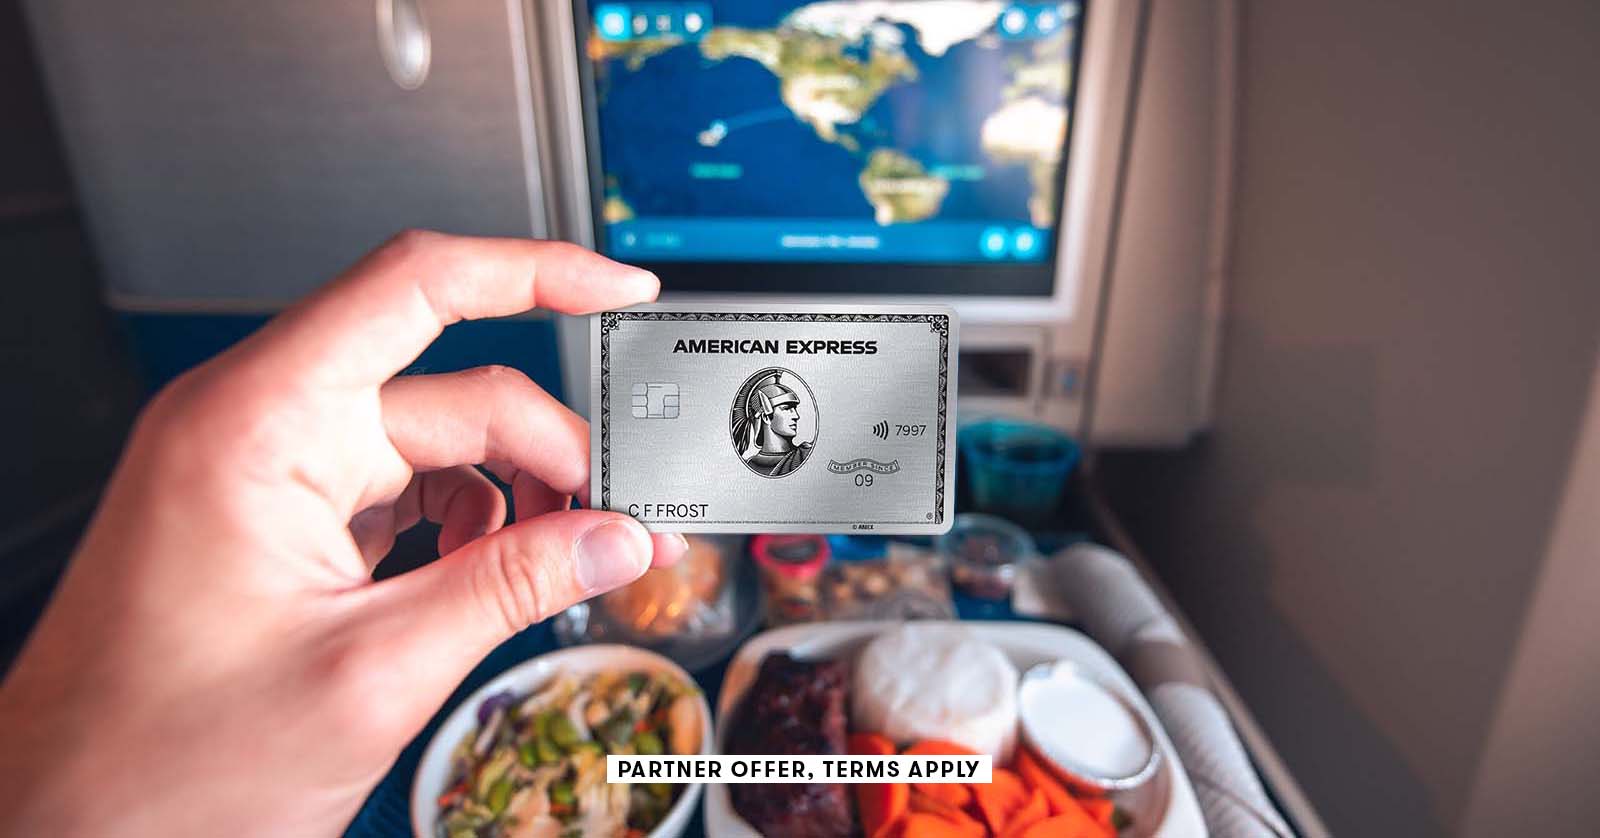 How to earn a 80,000-point (or more) welcome offer on the Amex Platinum